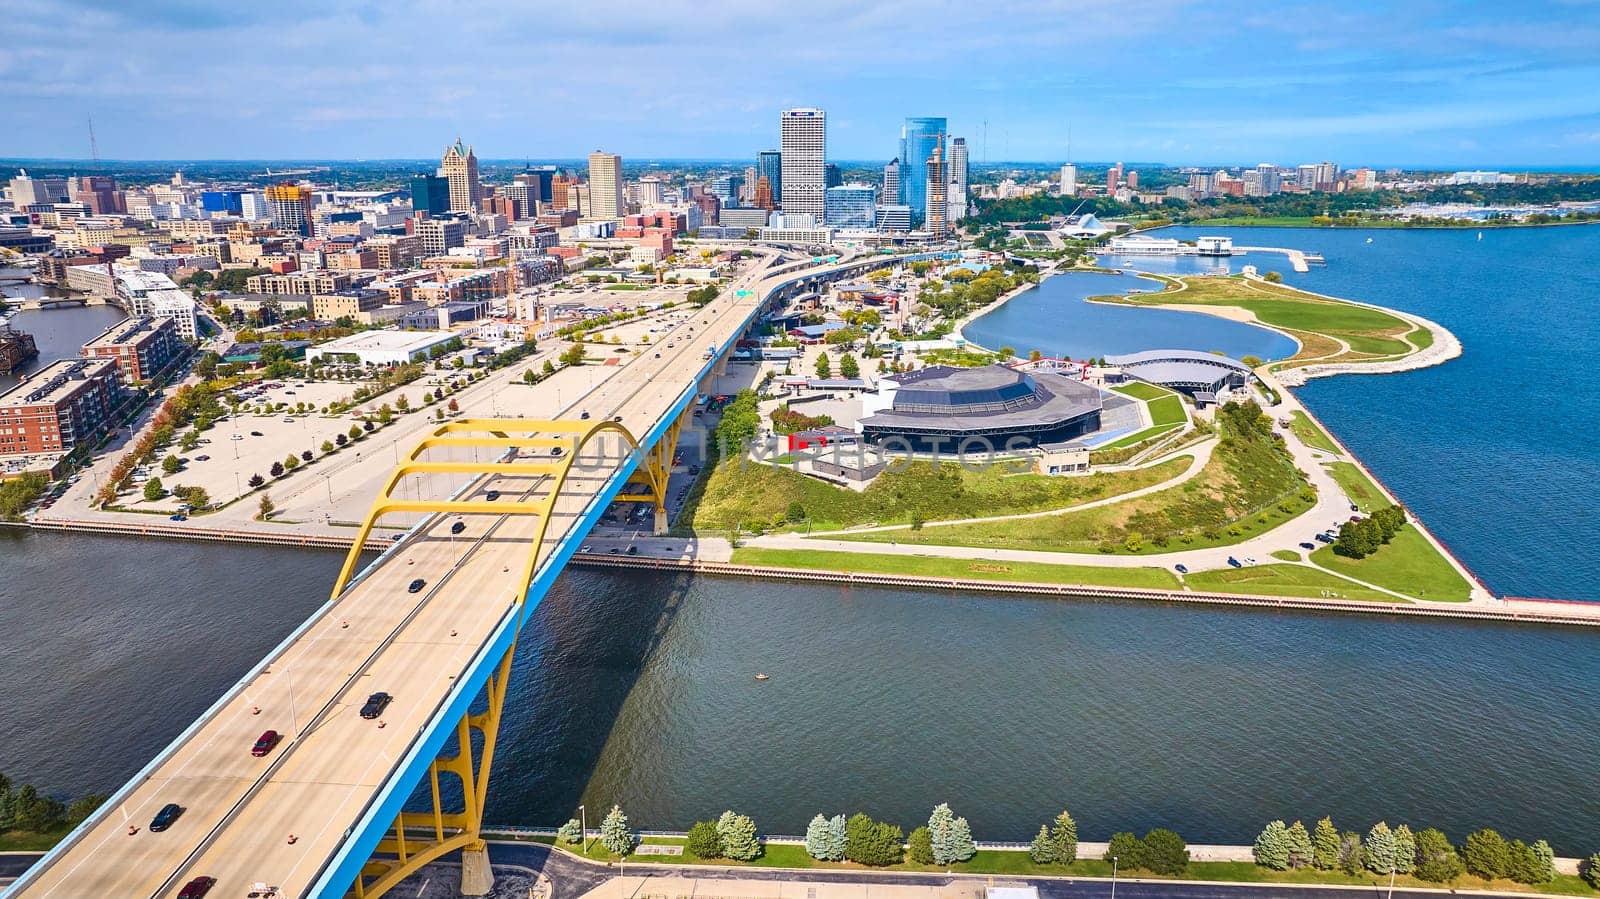 Sunny Day Aerial View of Daniel W. Hoan Memorial Bridge Spanning Lake Michigan, Milwaukee's Vibrant Waterfront Park, and Bustling Downtown Skyline